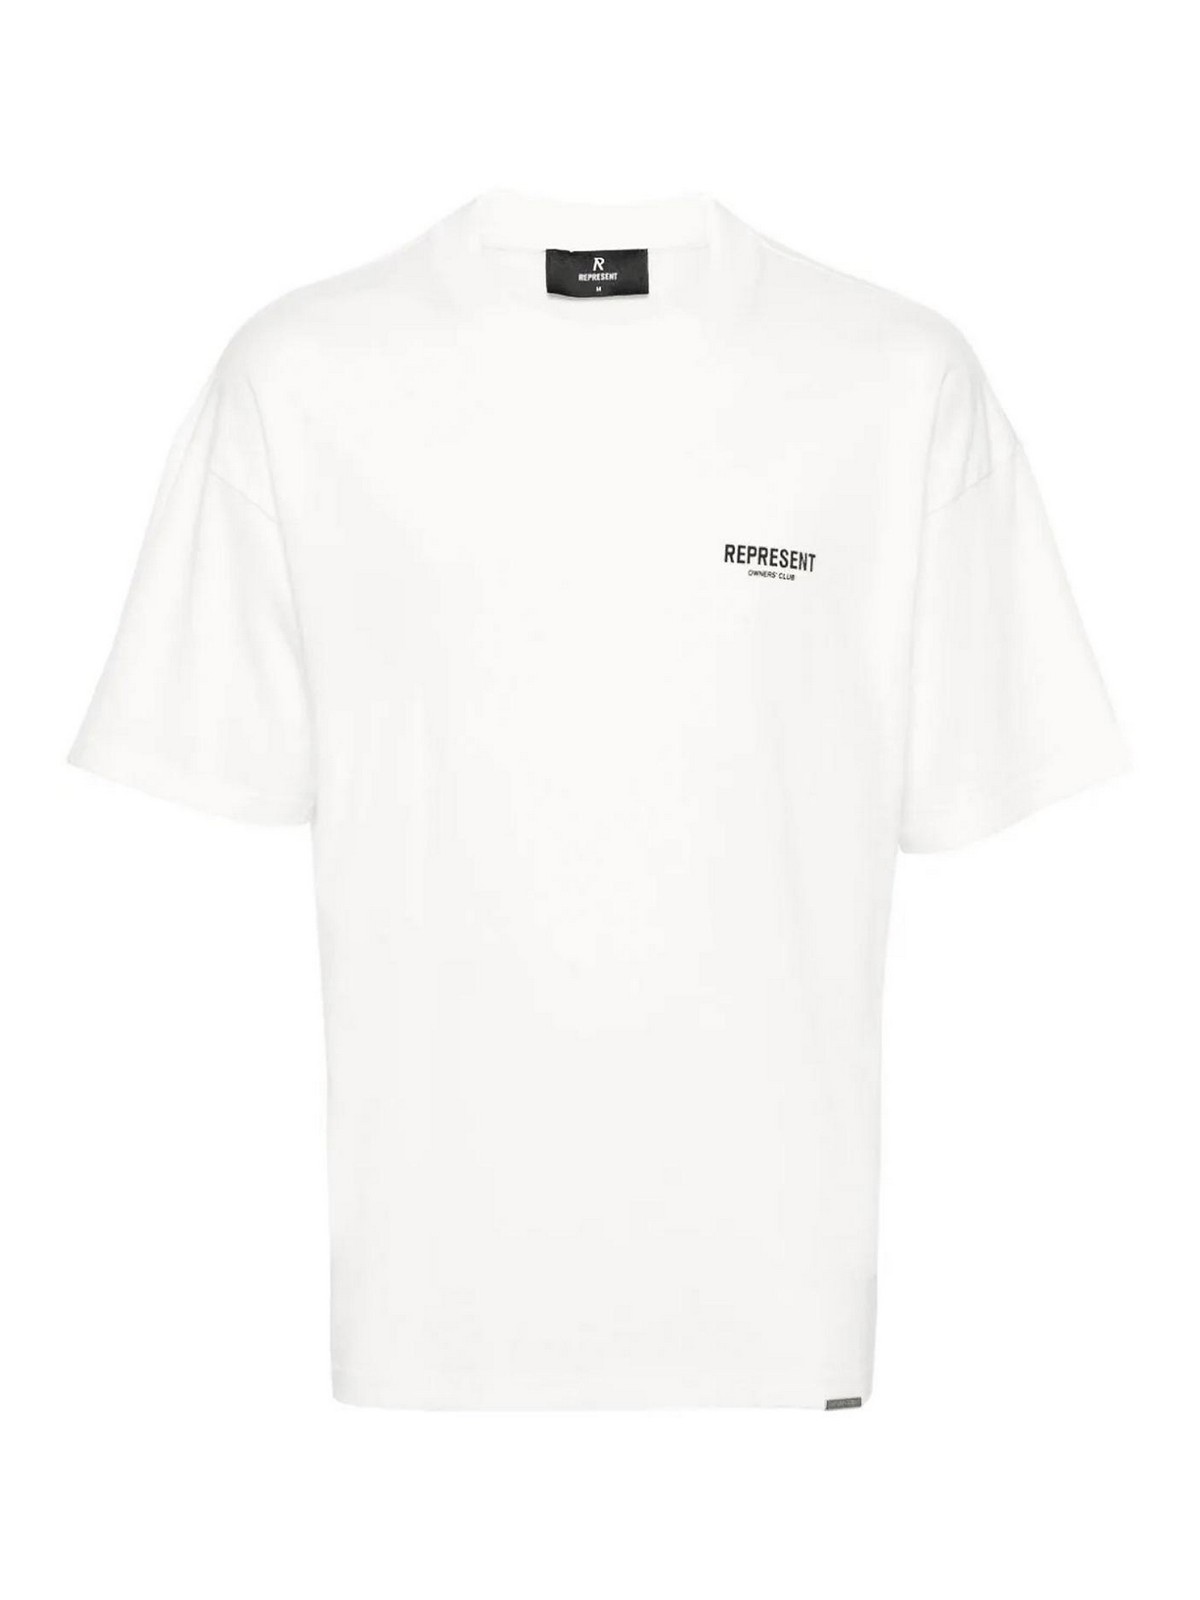 Shop Represent Owners Club T-shirt In Multicolour